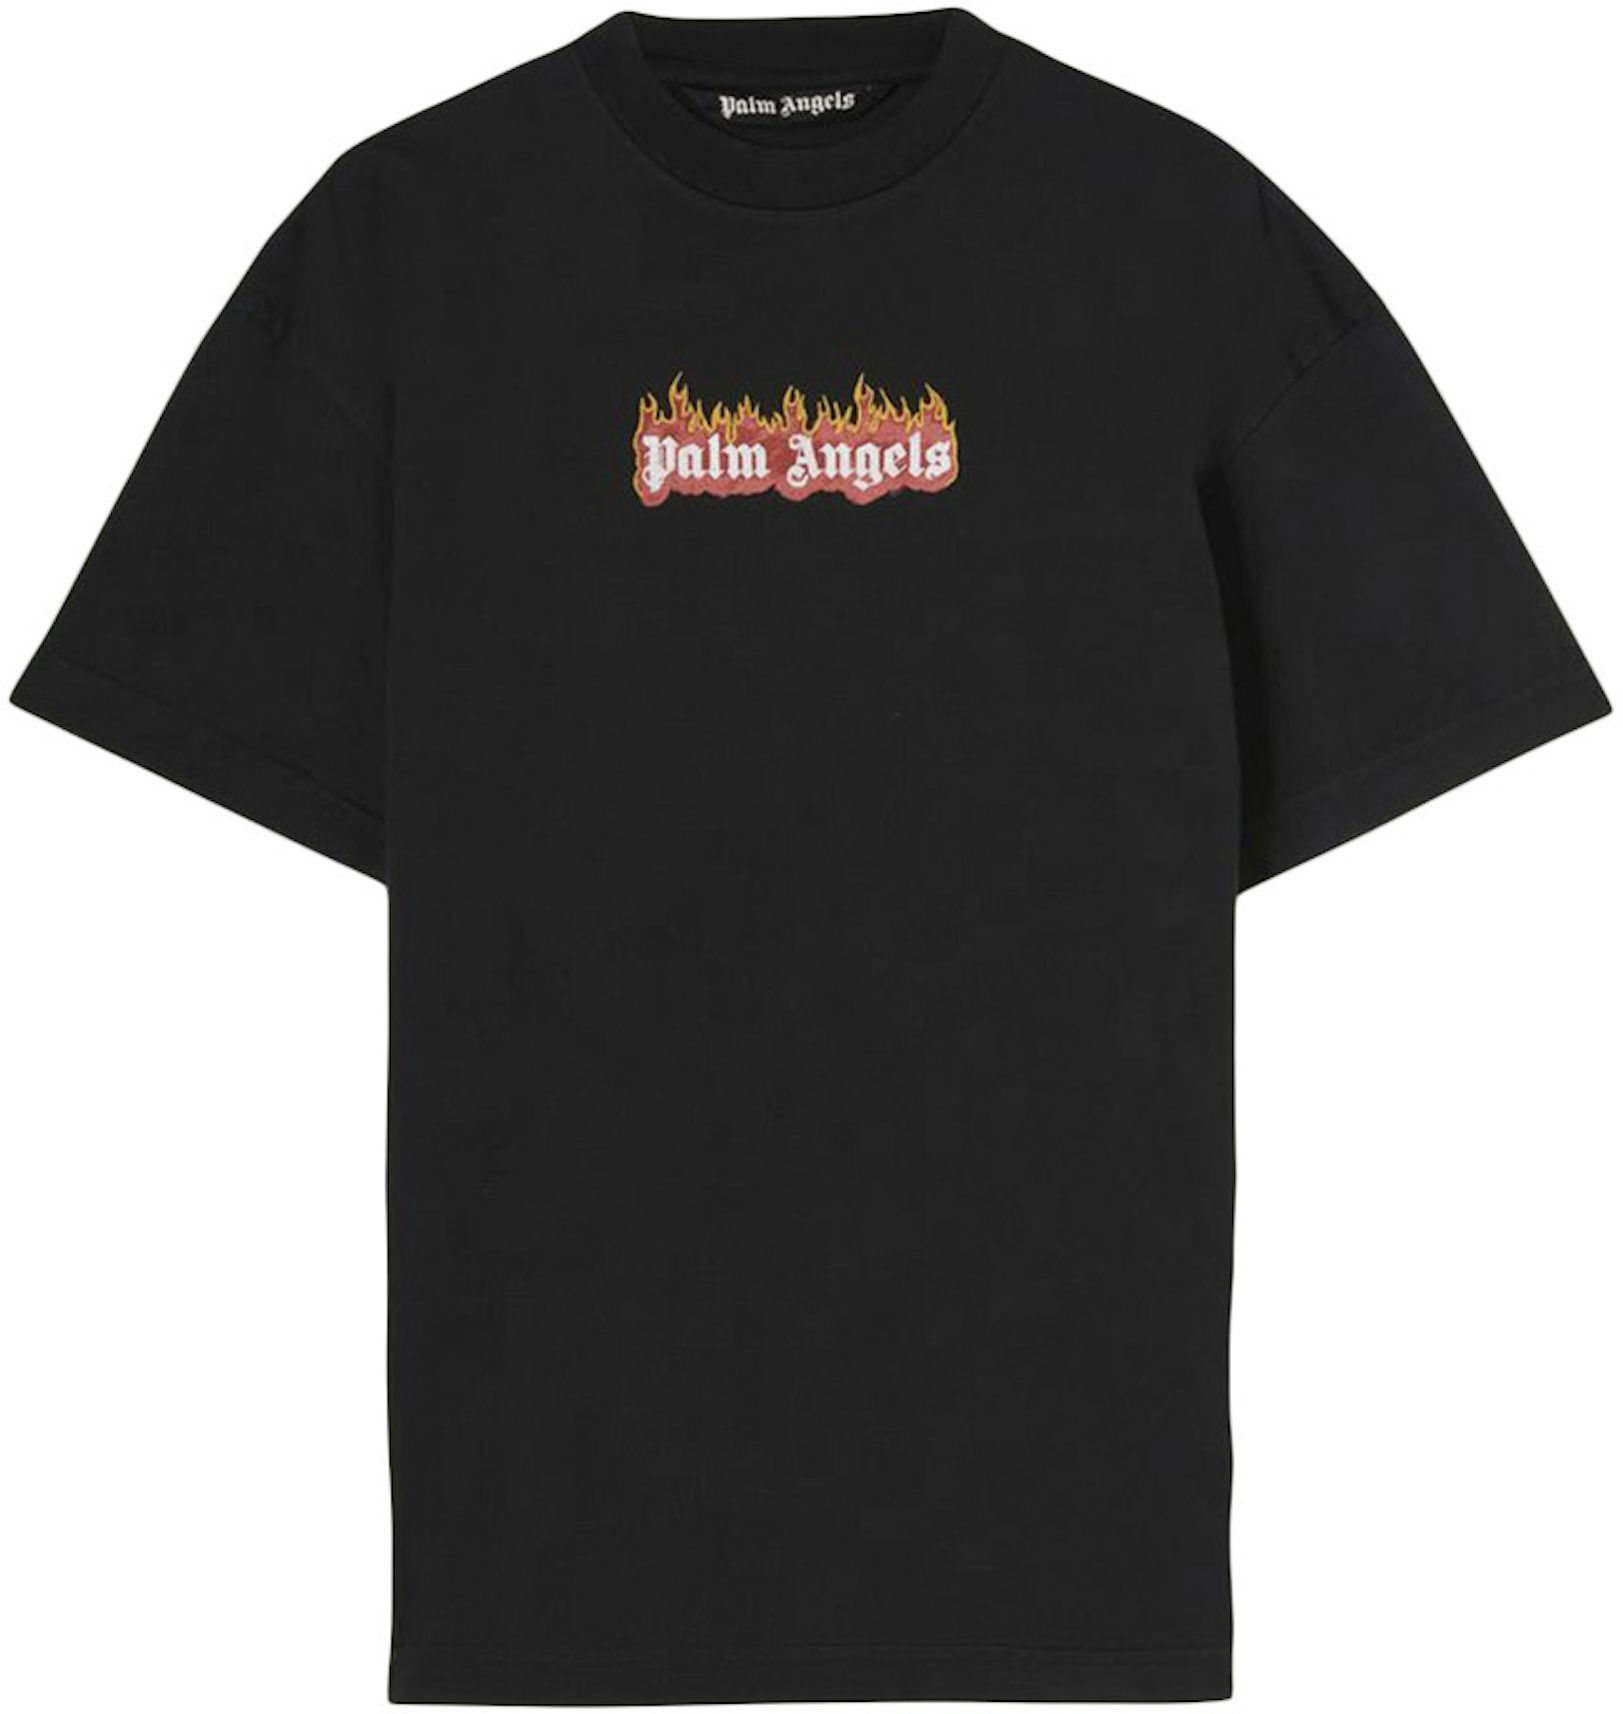 Buy Palm Angels T-Shirts - StockX